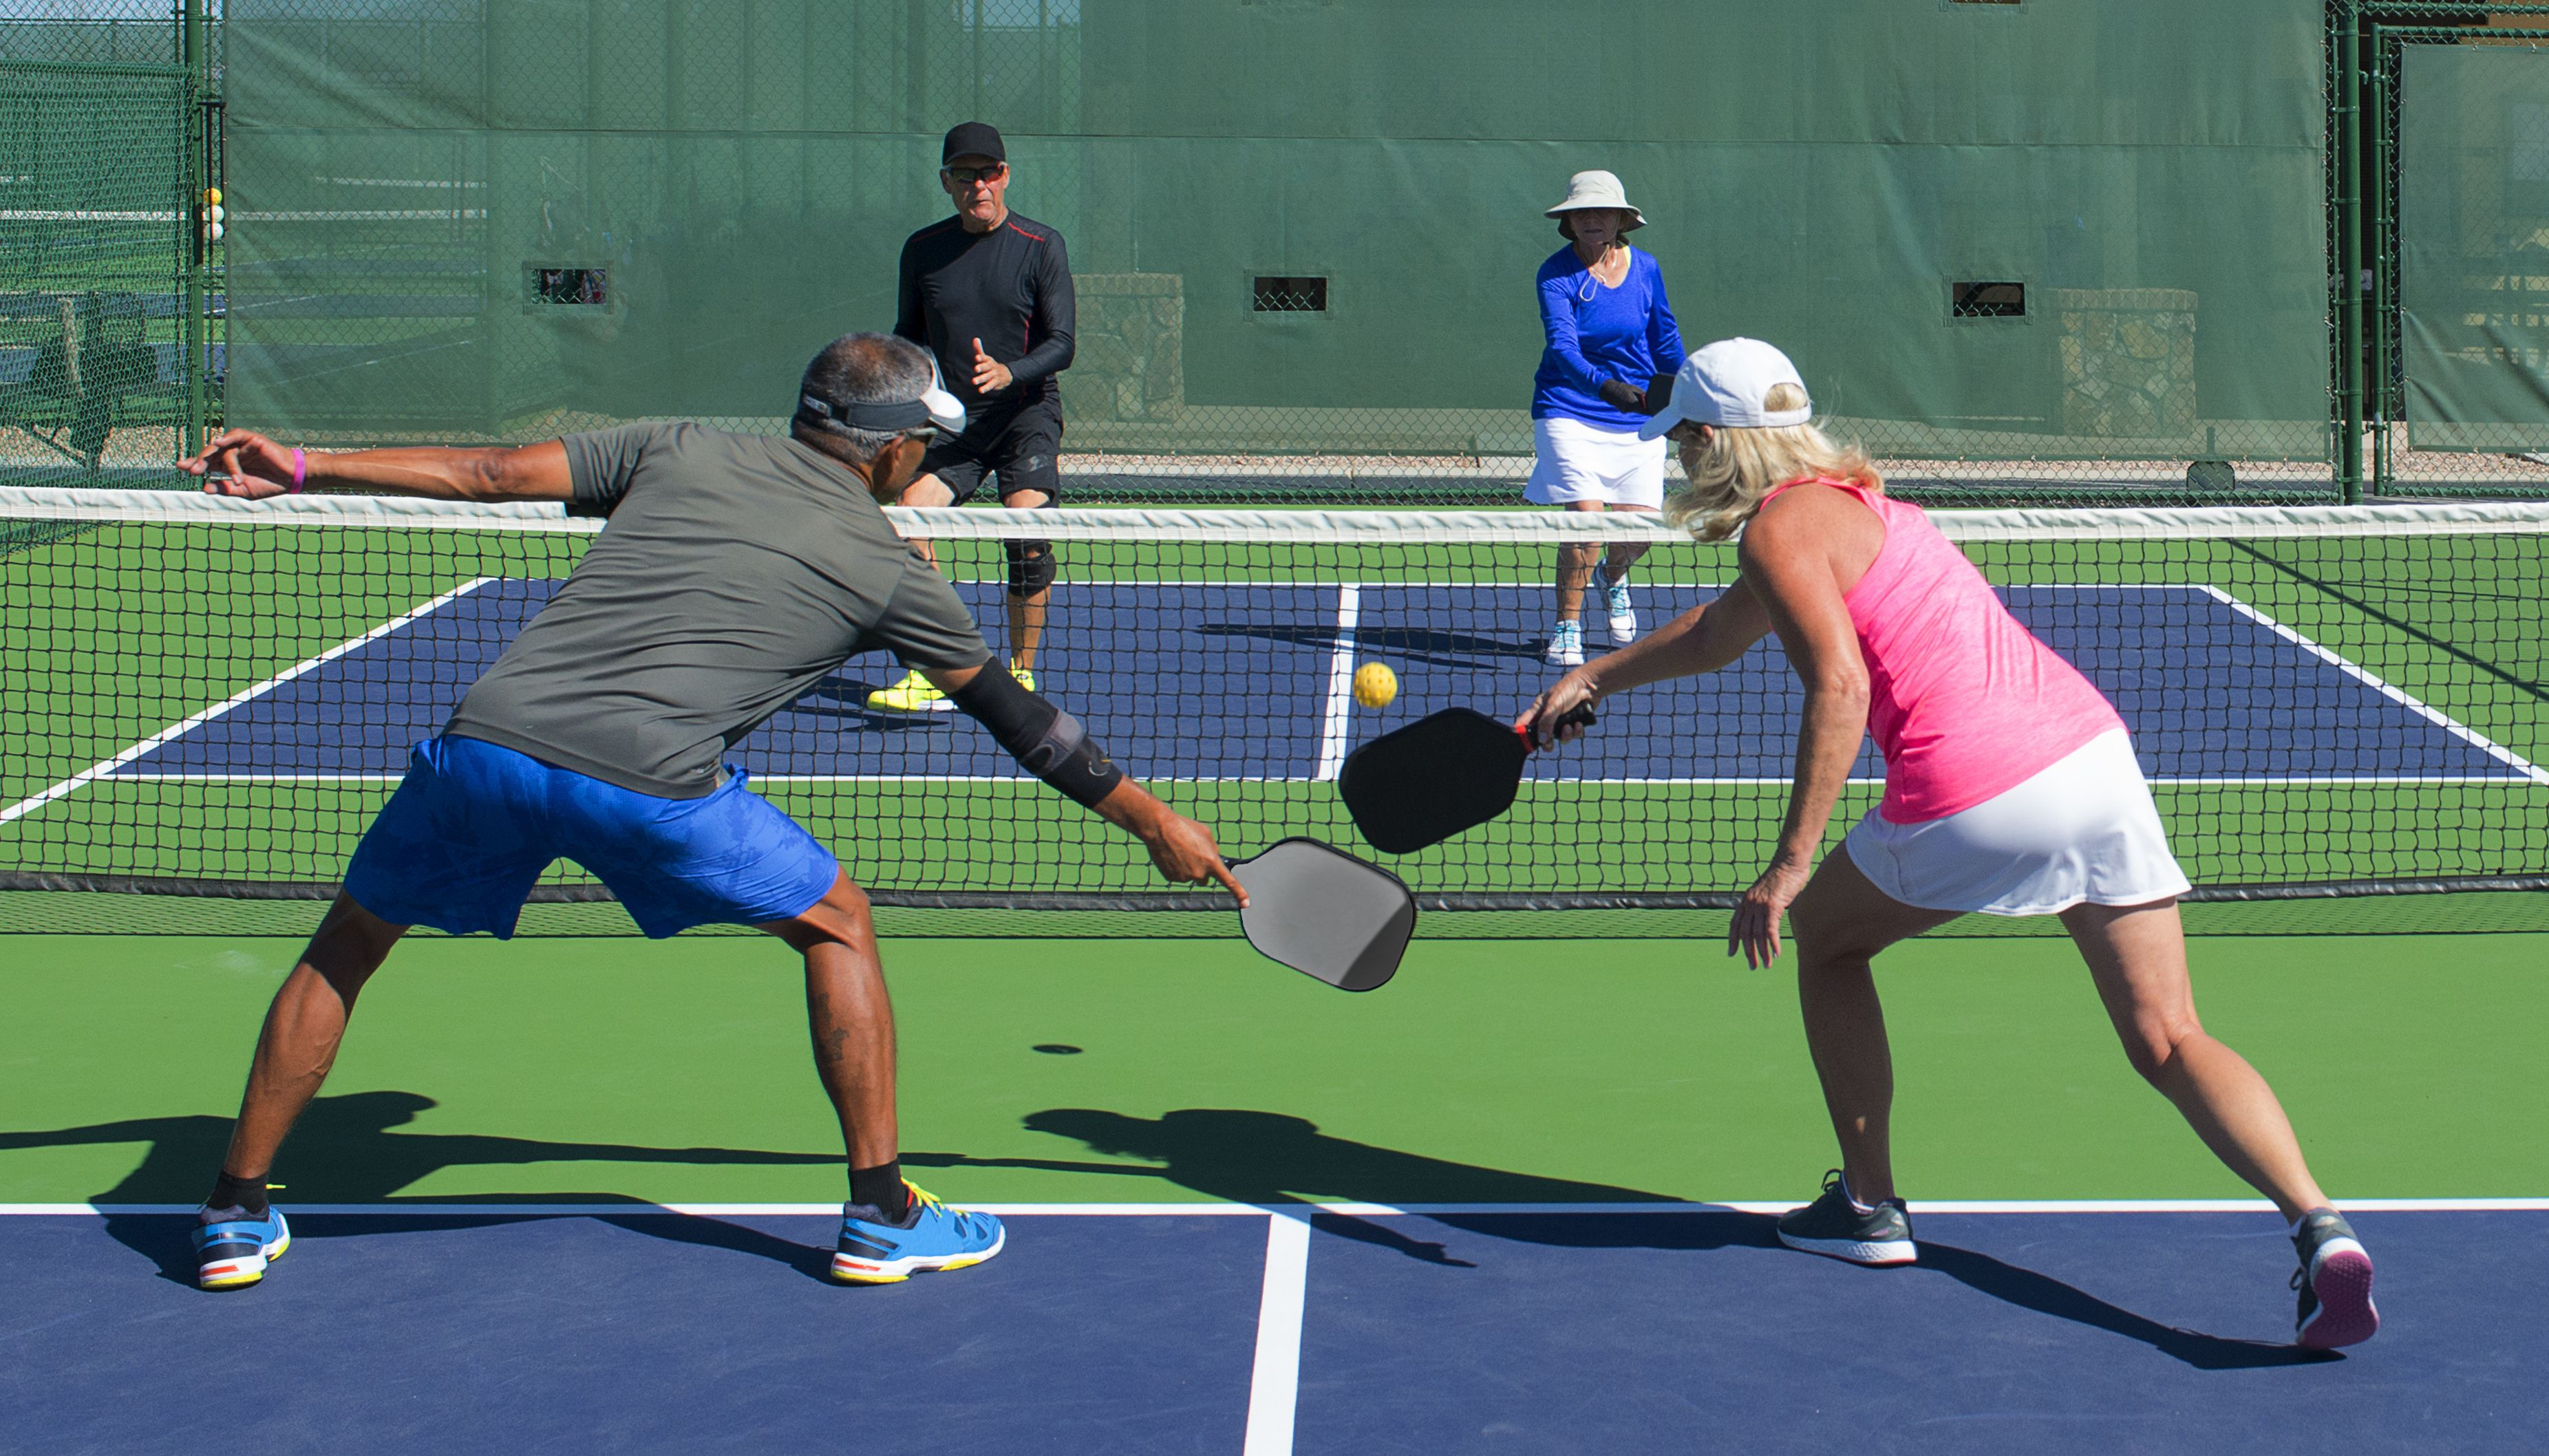 From Office to Court: Exploring the Benefits of Using Pickleball for Corporate Team Building